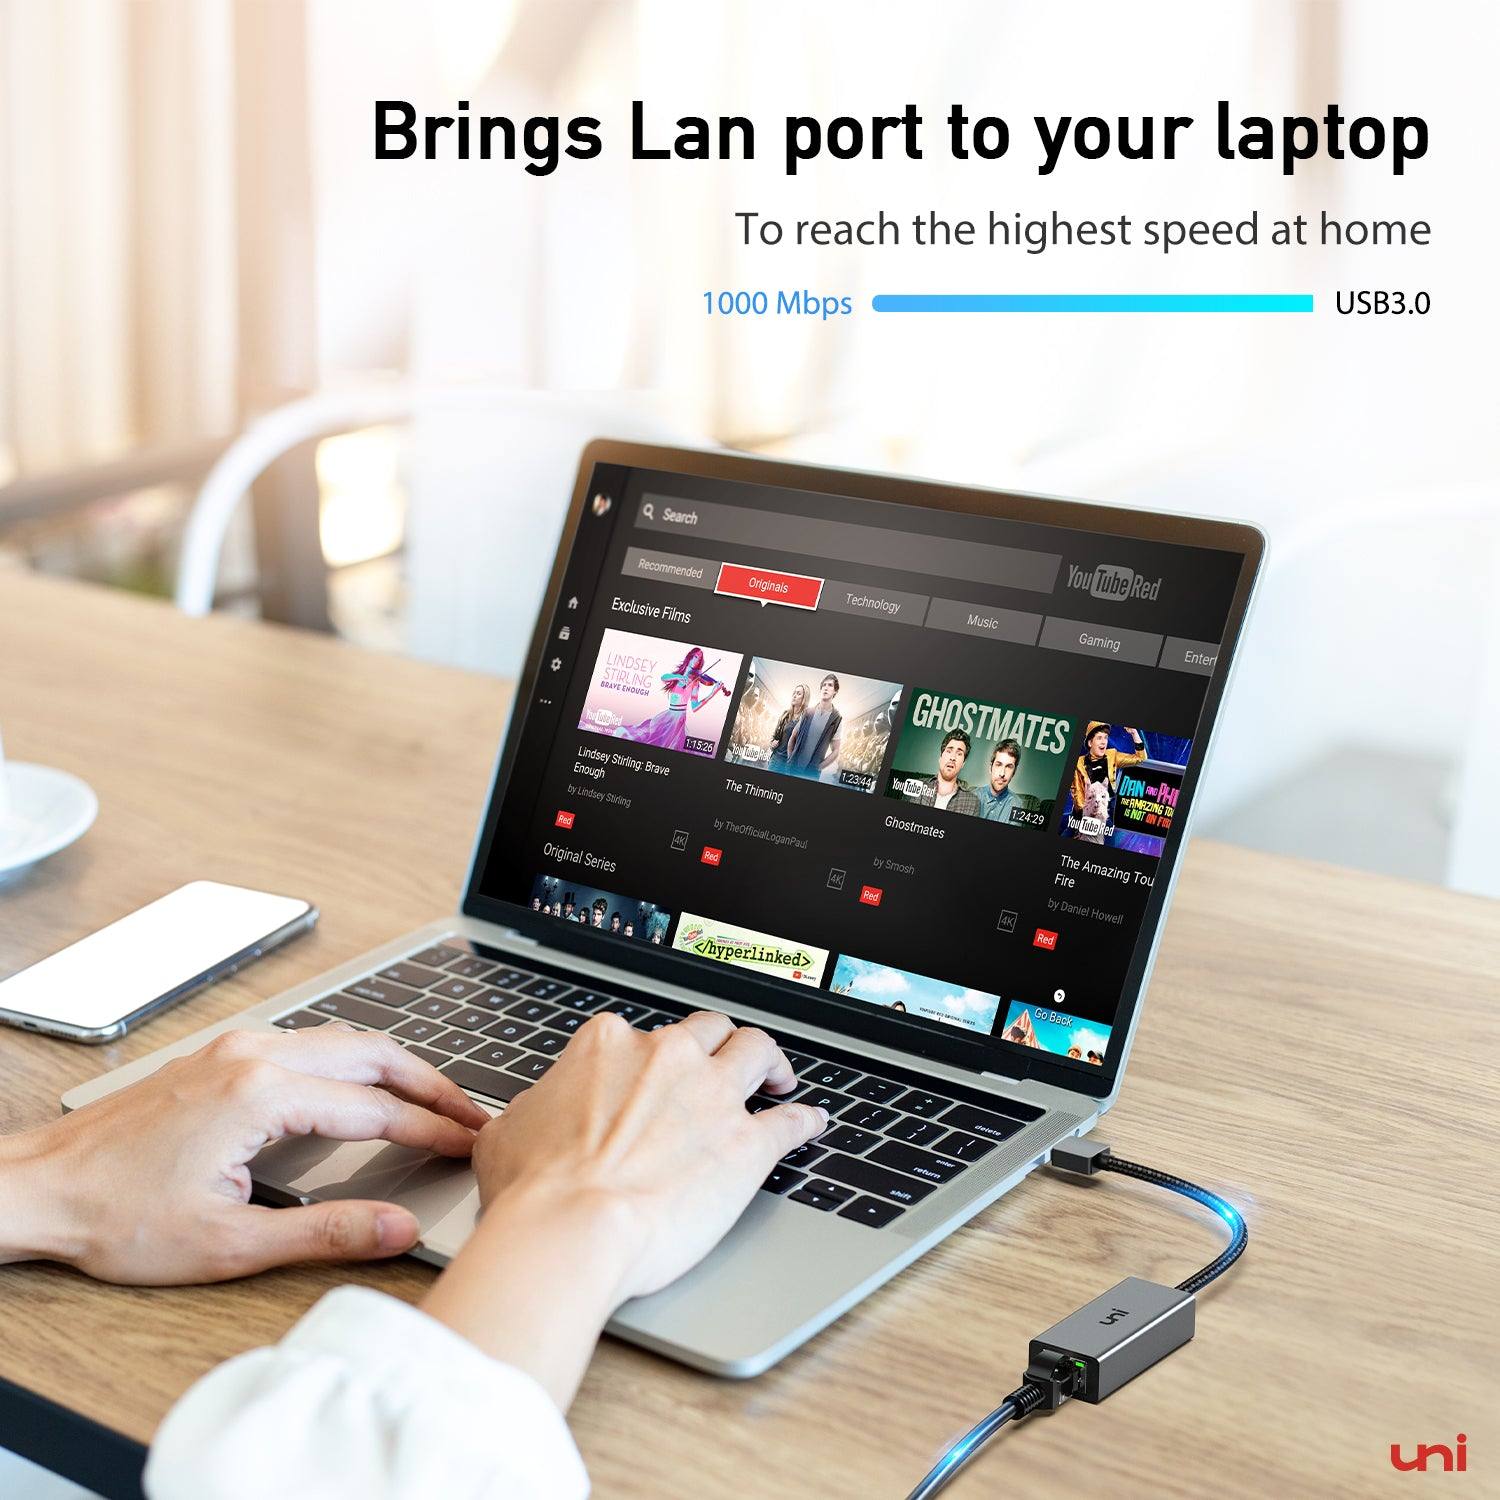  Wired Internet LAN Adapter for your Laptops | uni